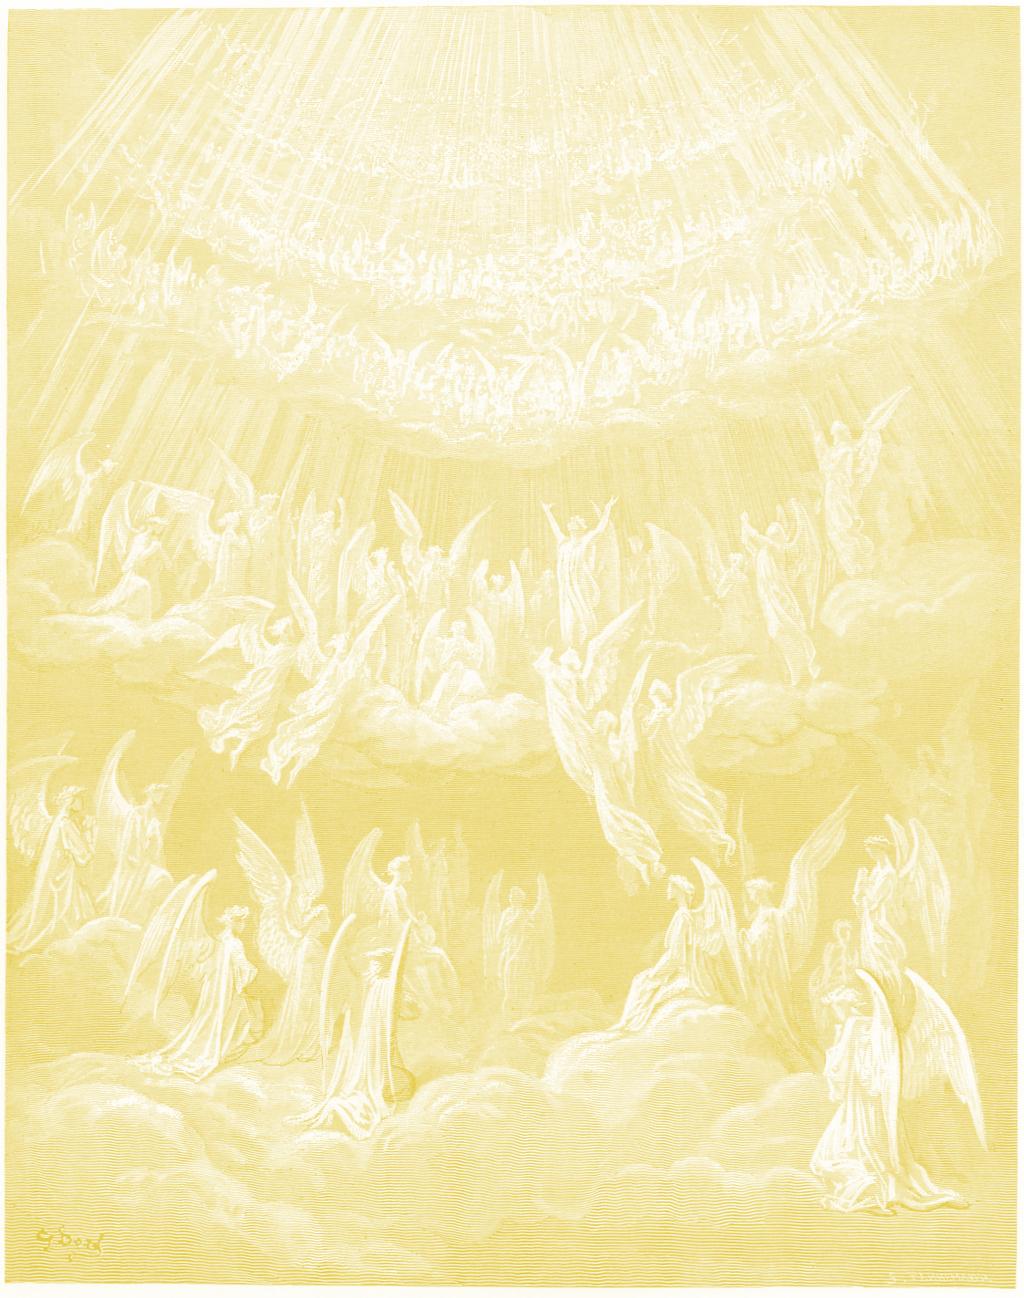 COME HOLY SPIRIT Come, Holy Spirit, fill the hearts of Thy faithful, and enkindle in them the Fire of Thy Love.